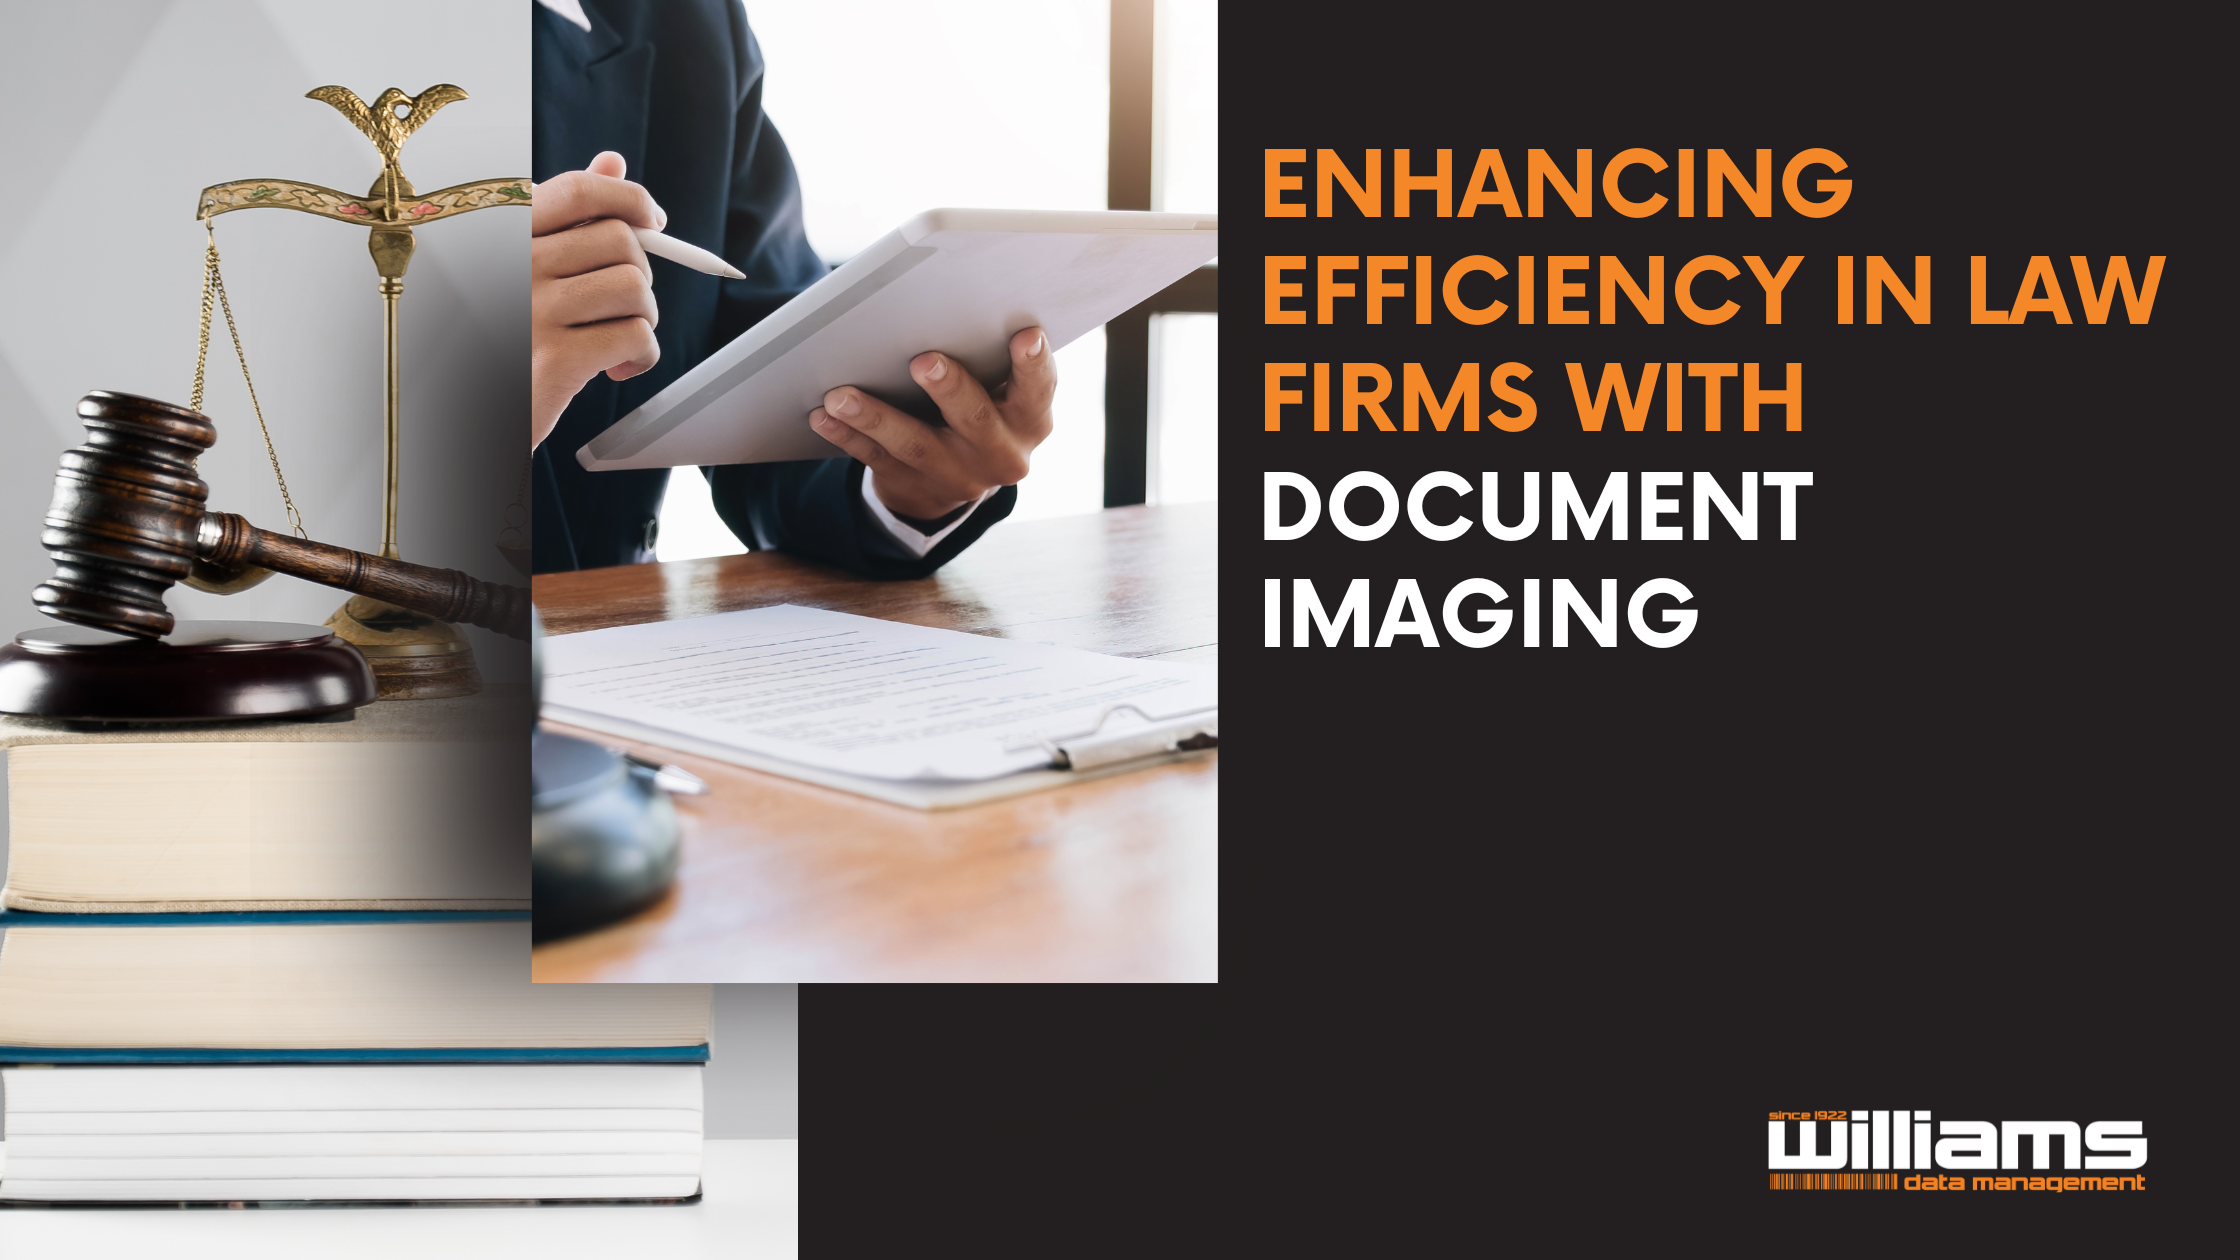 Document Imaging in Law firms